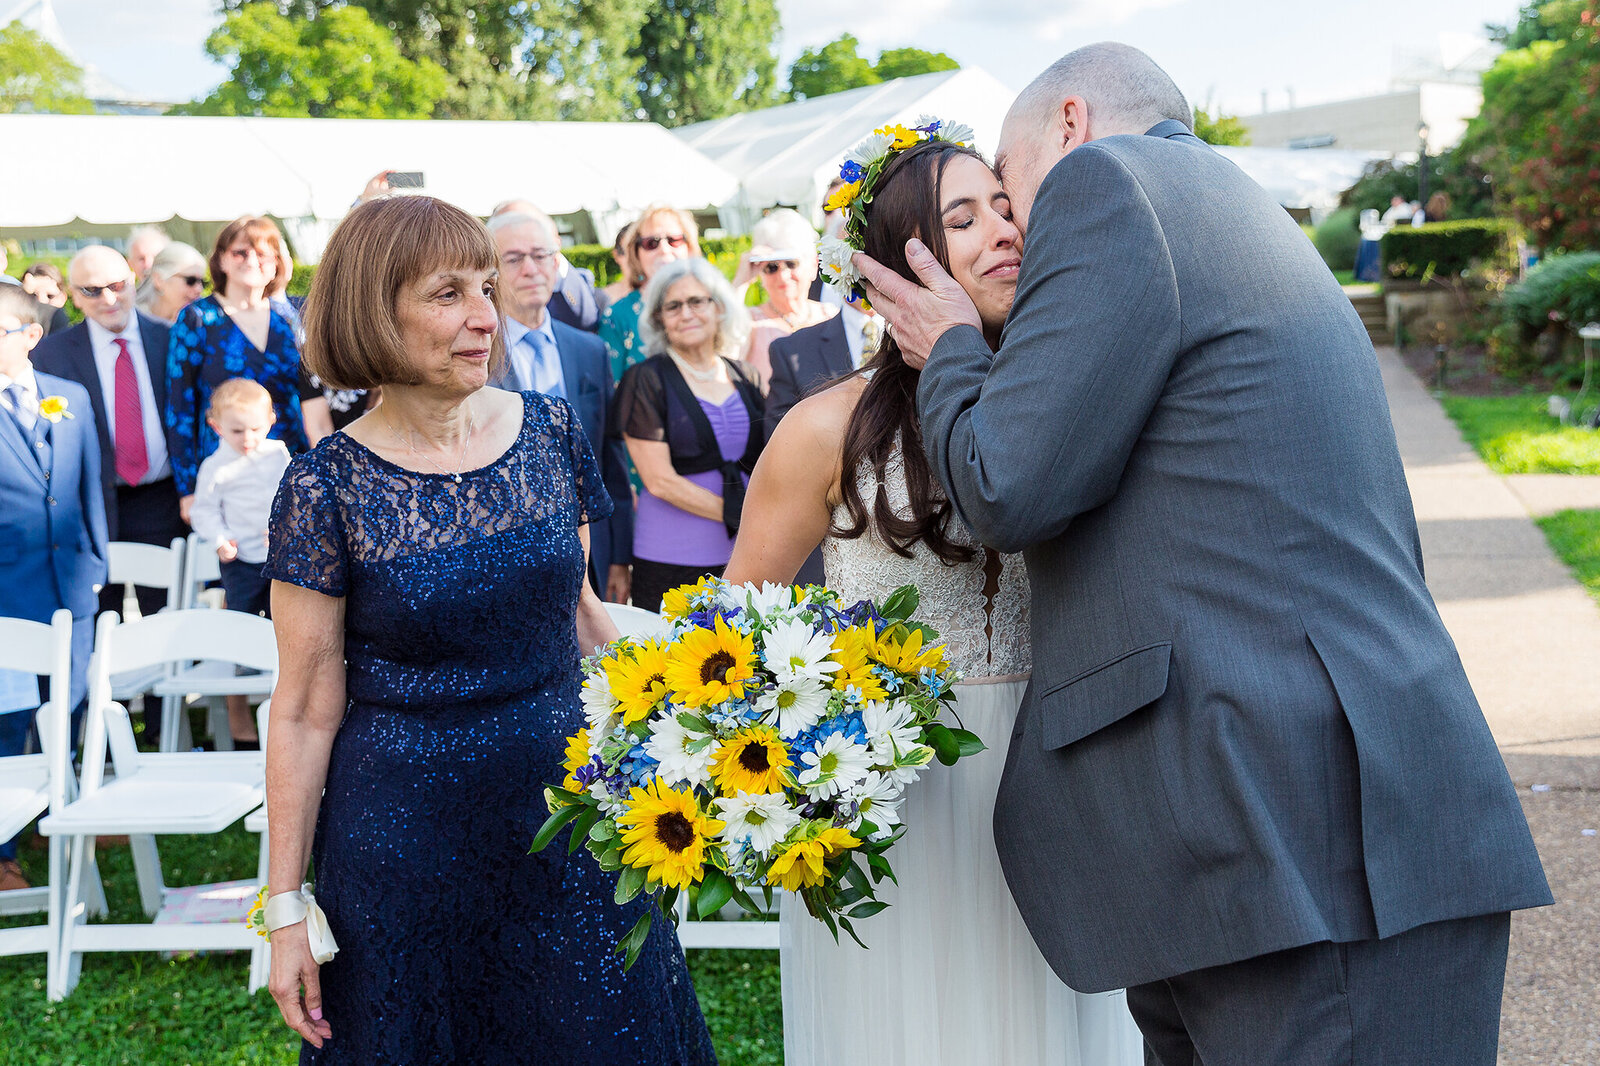 Dad kissing bride before giving her away to groom during outdoor Dallas wedding ceremony